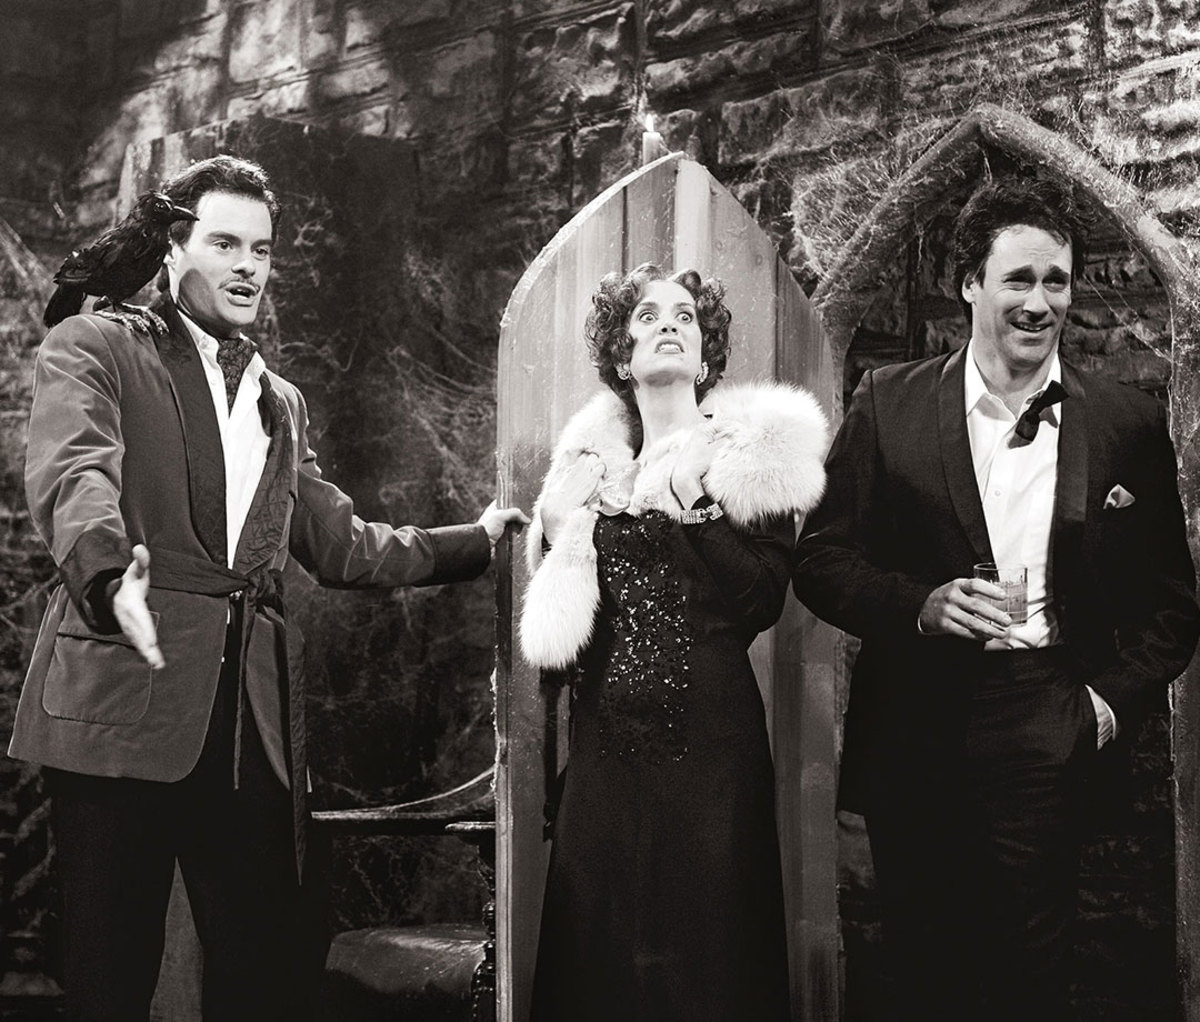 Bill Hader as Vincent Price, Kristen Wiig as Gloria Swanson, Jon Hamm as James Mason during the 'VIncent Price's Halloween Special' skit on October 25, 2008